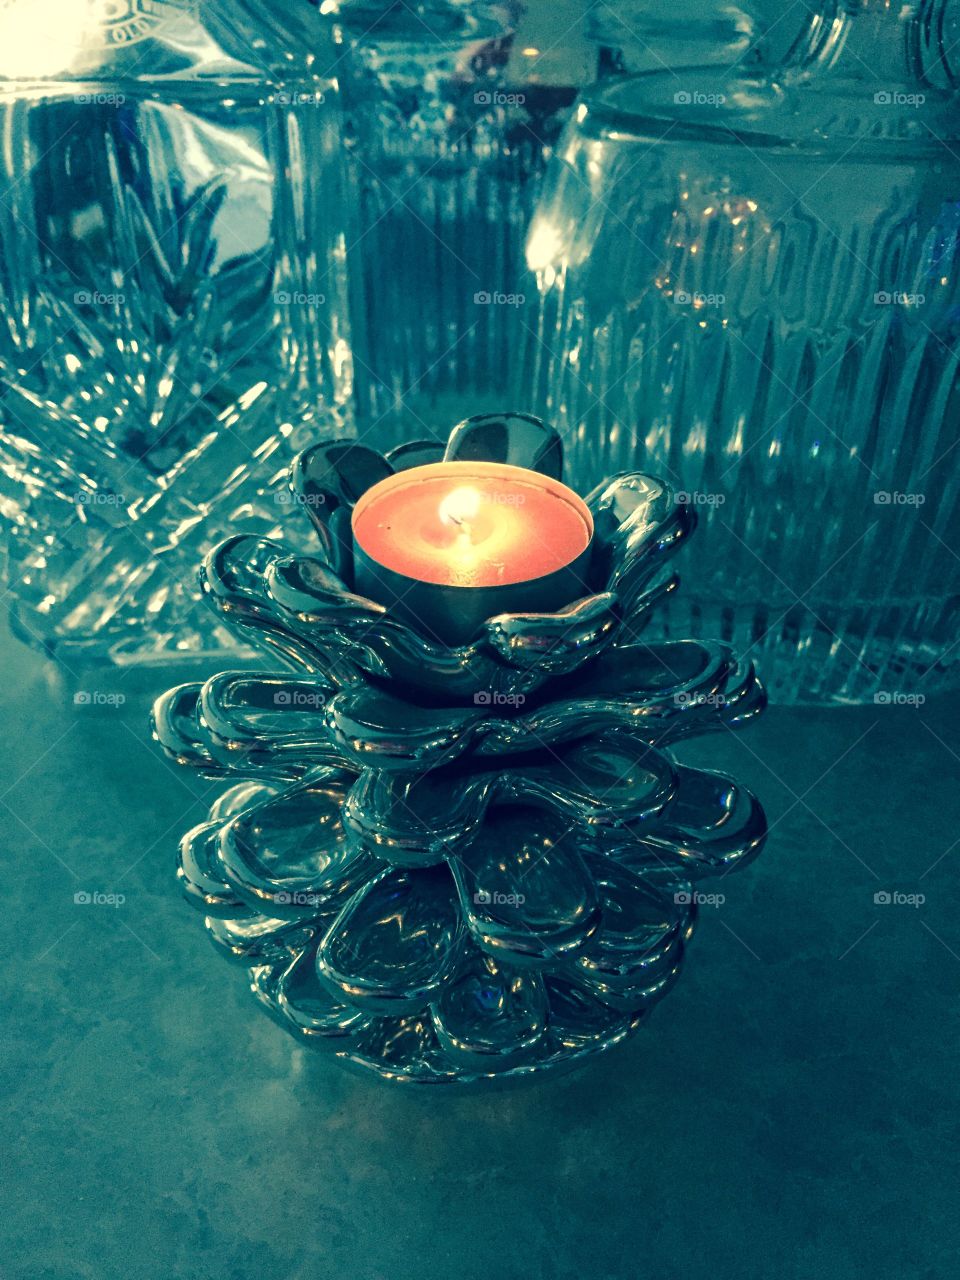 Silver pinecone . Silver candle holder with lighted candle